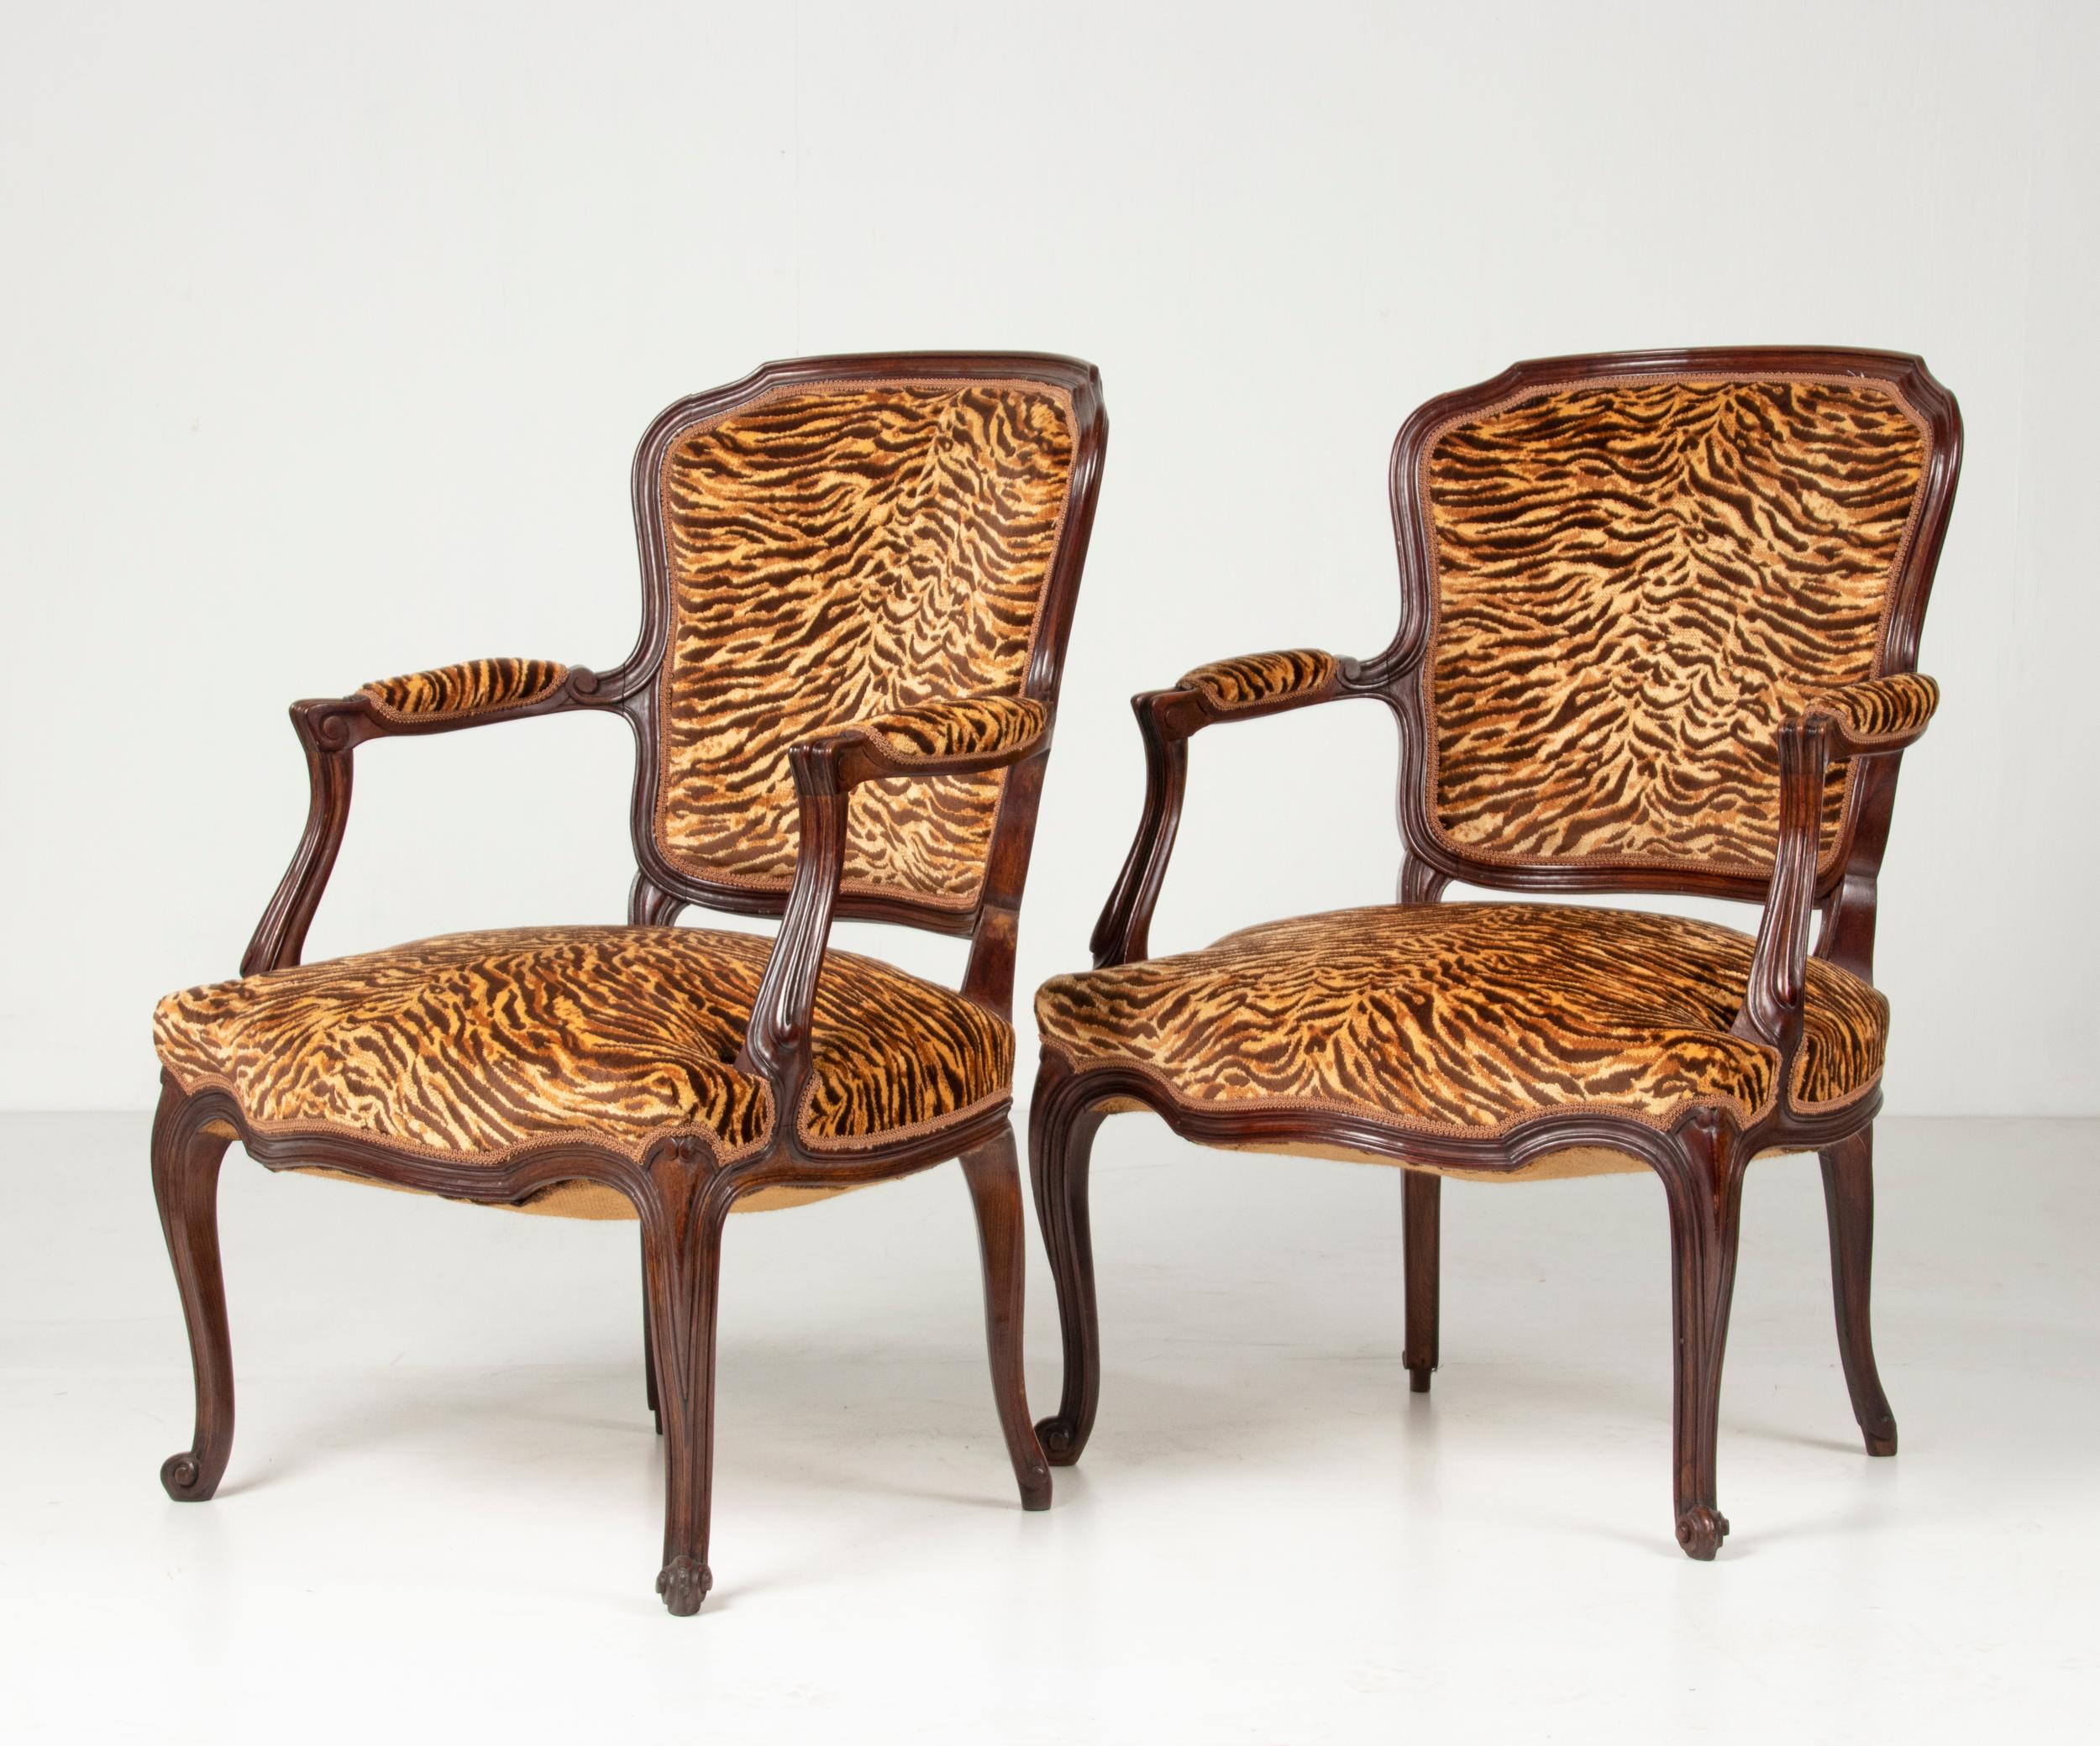 Two charming French 'cabriolet' seats in Louis XV style. The chairs are made of beech wood, circa 1900. The chairs have recently been reupholstered with a tiger print fabric.
The woodwork is beautifully refined, with fine fluting and slightly